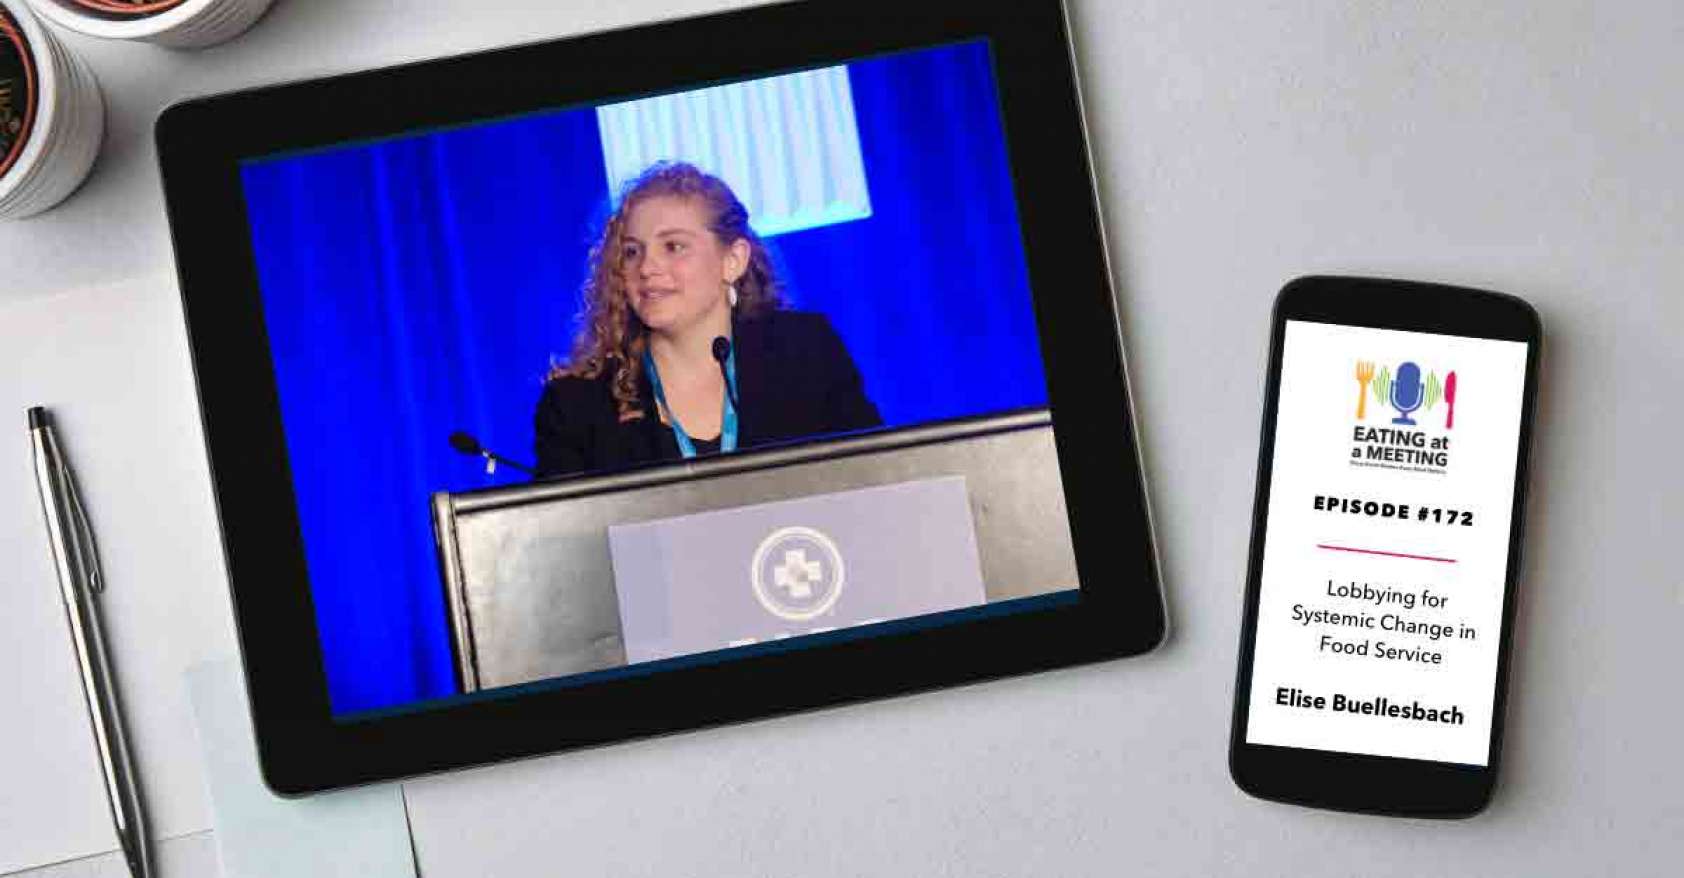 An iPad and iPhone on a table. On the iPad is a picture of a young woman standing behind a lectern are on video screen. On the iPhone is the Eating at a Meeting podcast logo with Episode #172 Lobbying for Systemic Change in Food Service with Elise Buellesbach